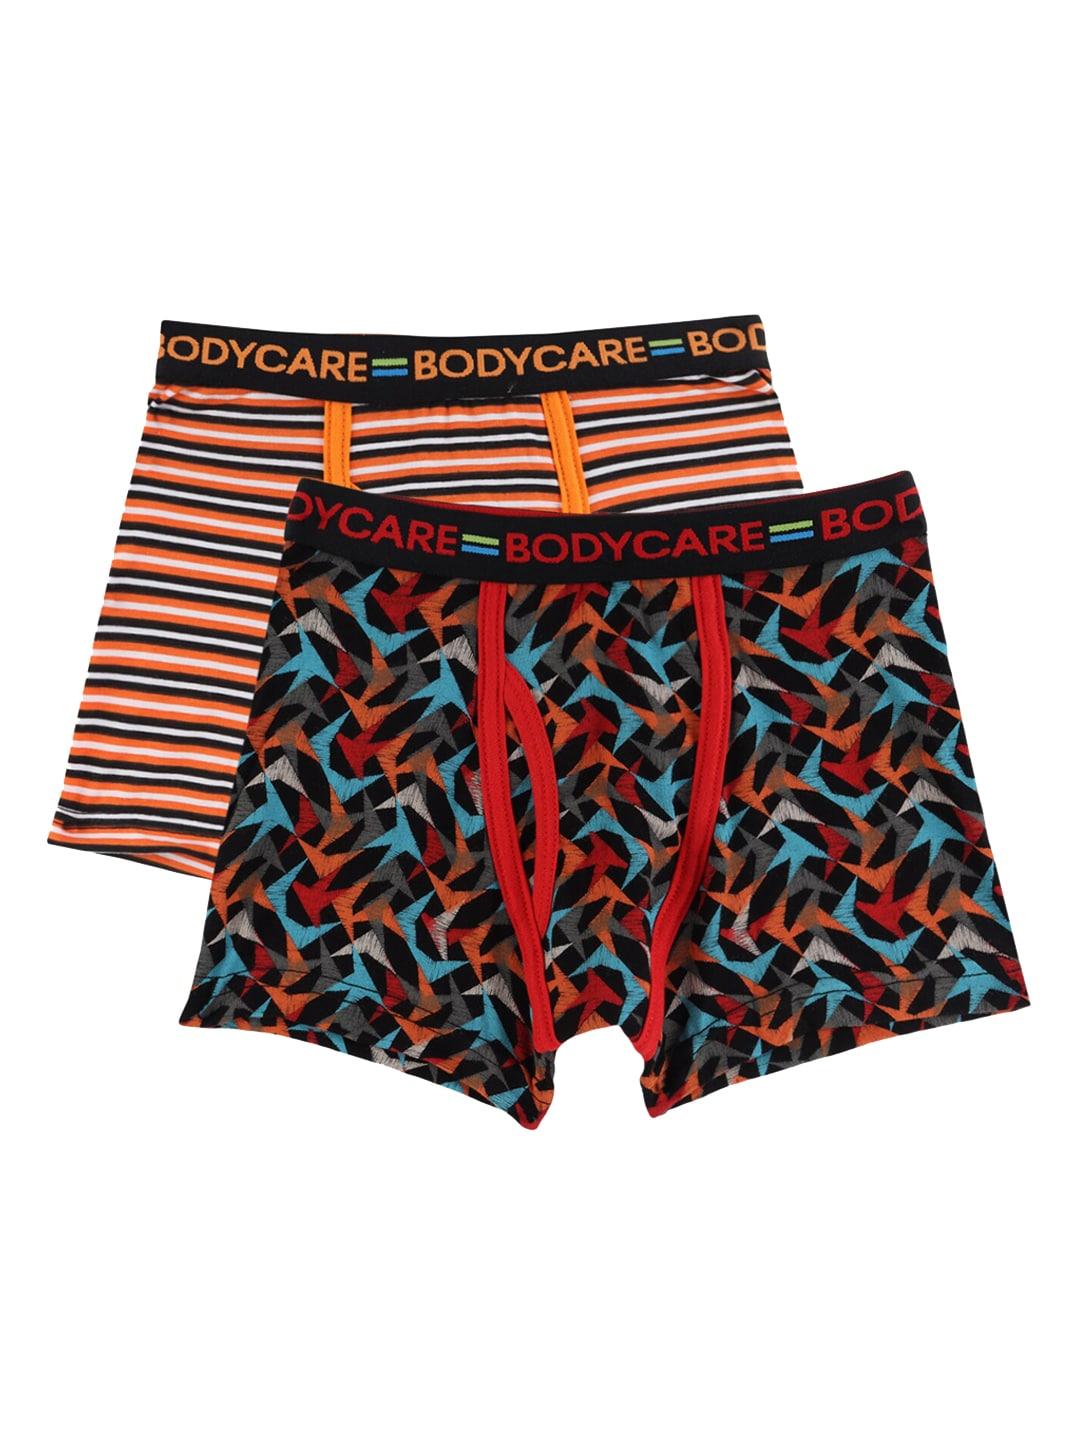 Bodycare Kids Boys Pack Of 2 Red & Orange Coloured Solid Cotton Trunk KGA2062RO-PK004